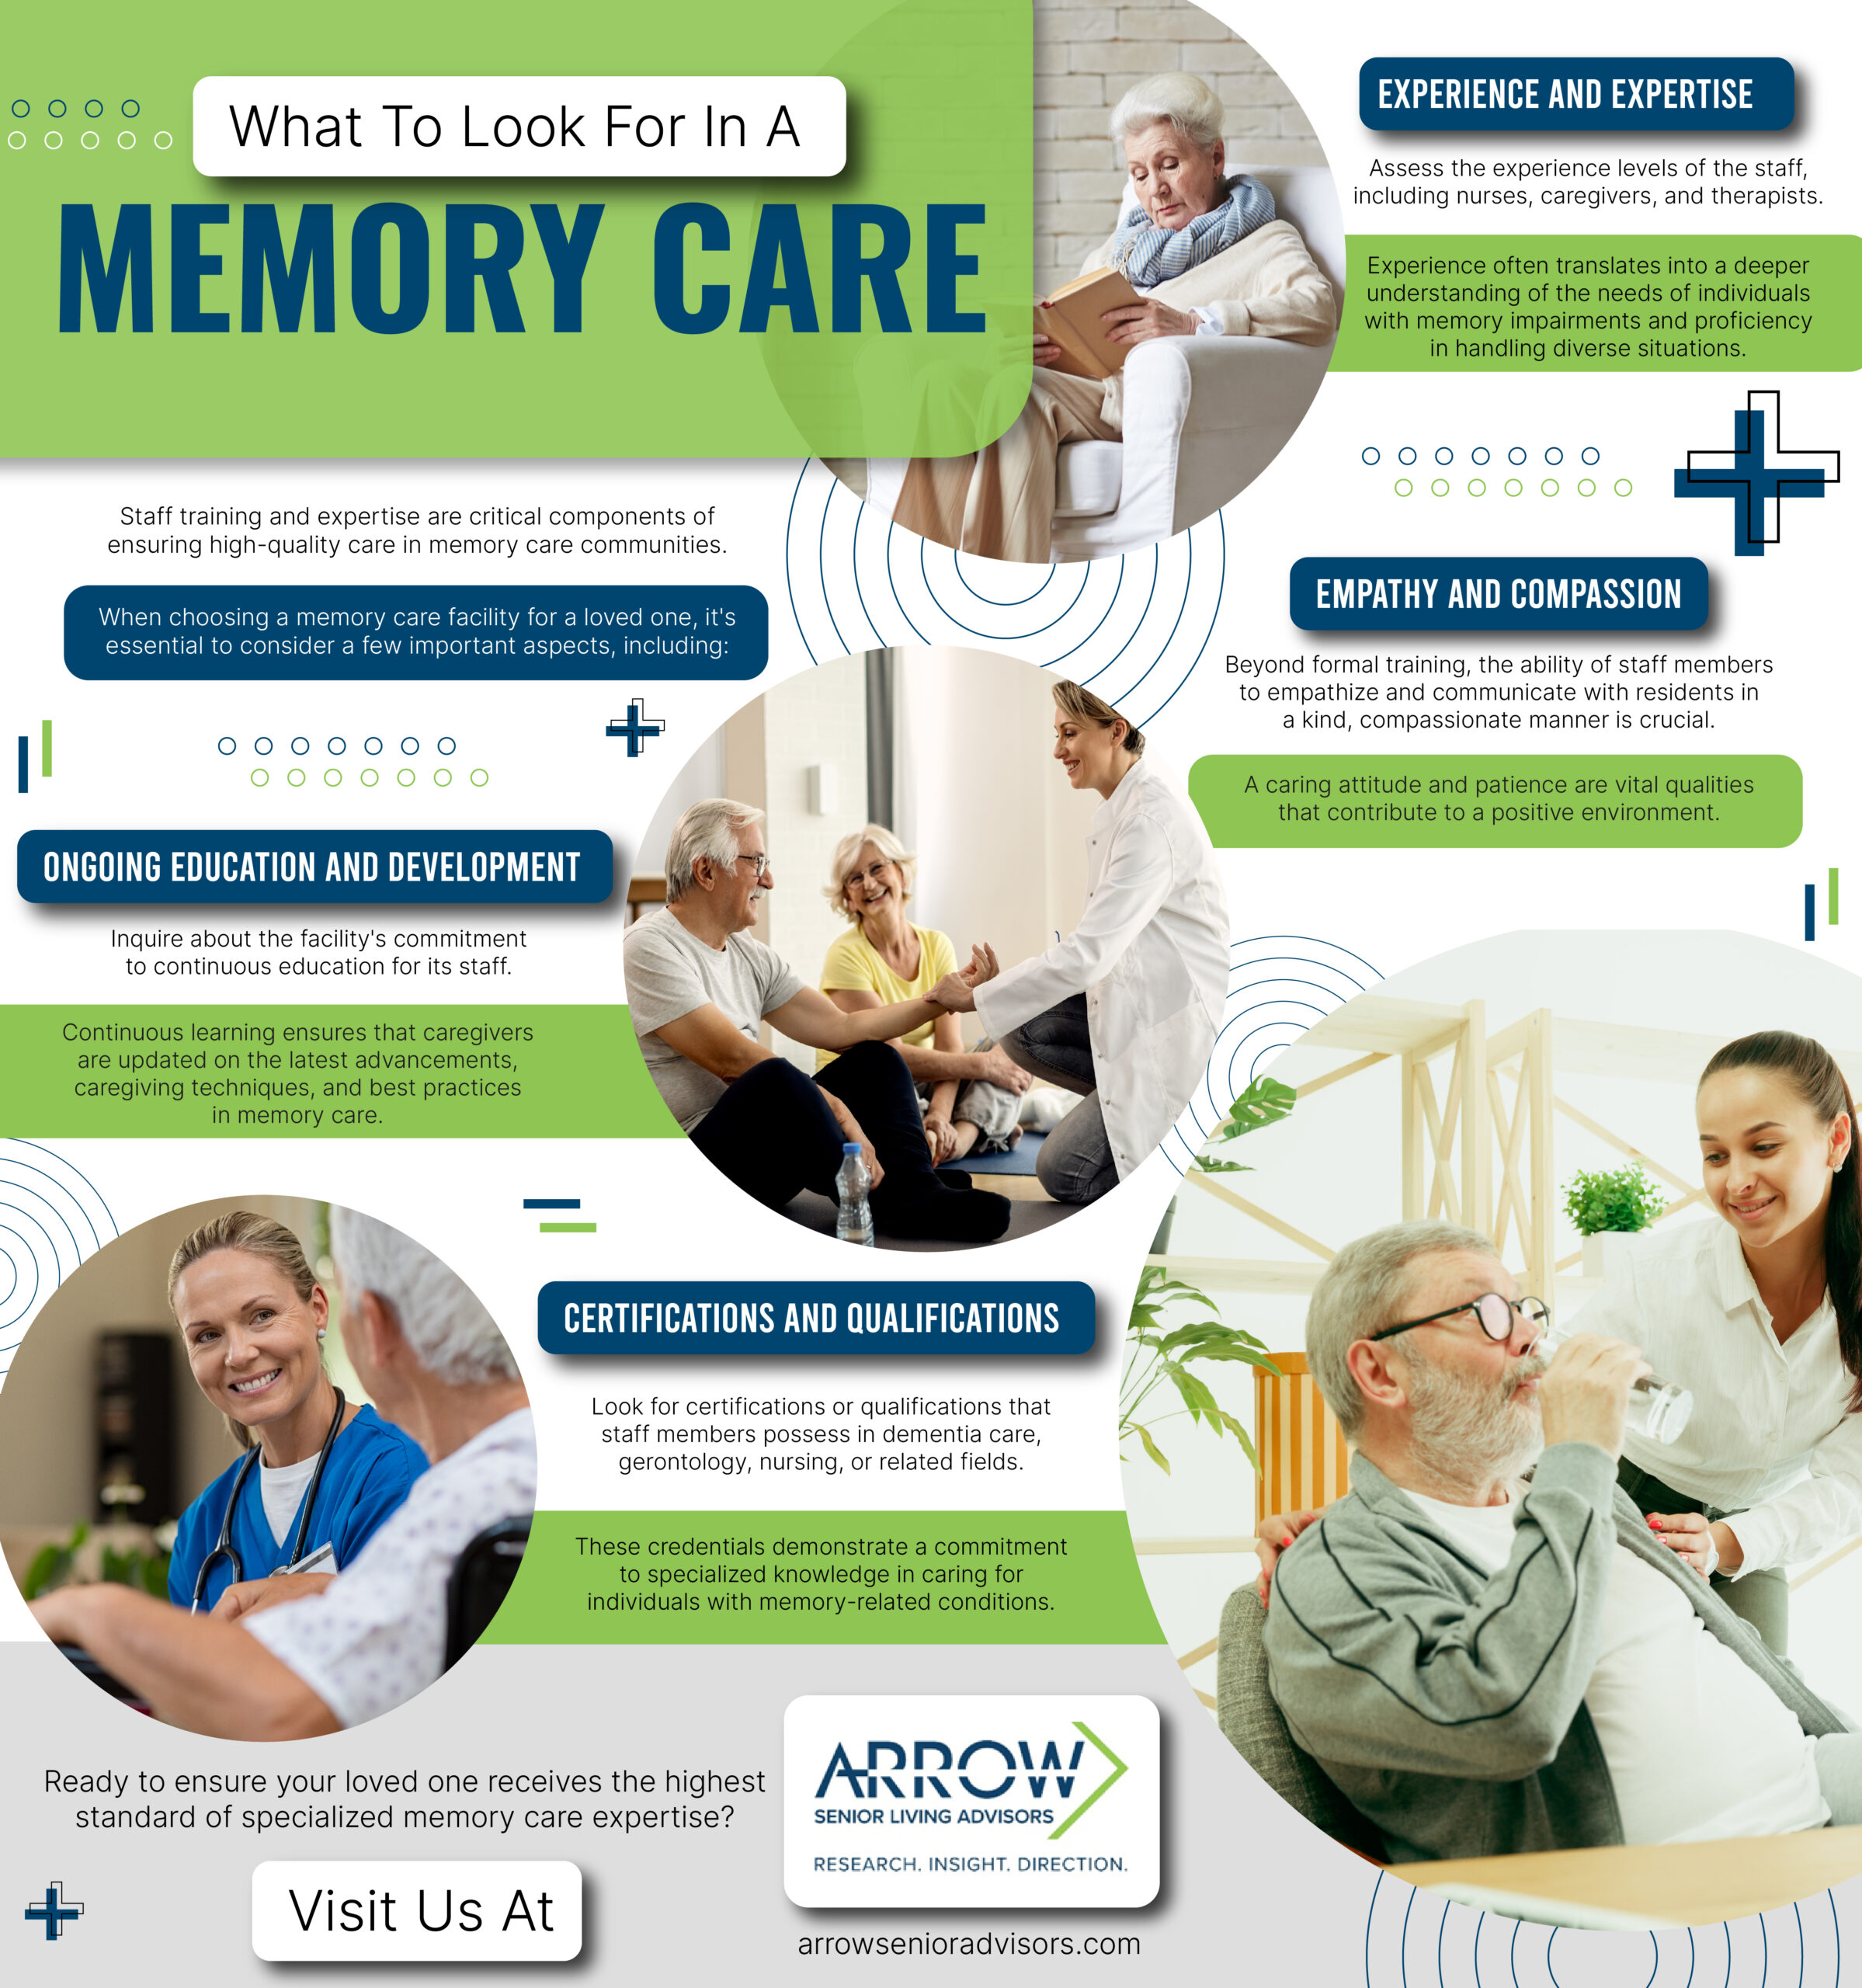 What To Look For In A Memory Care